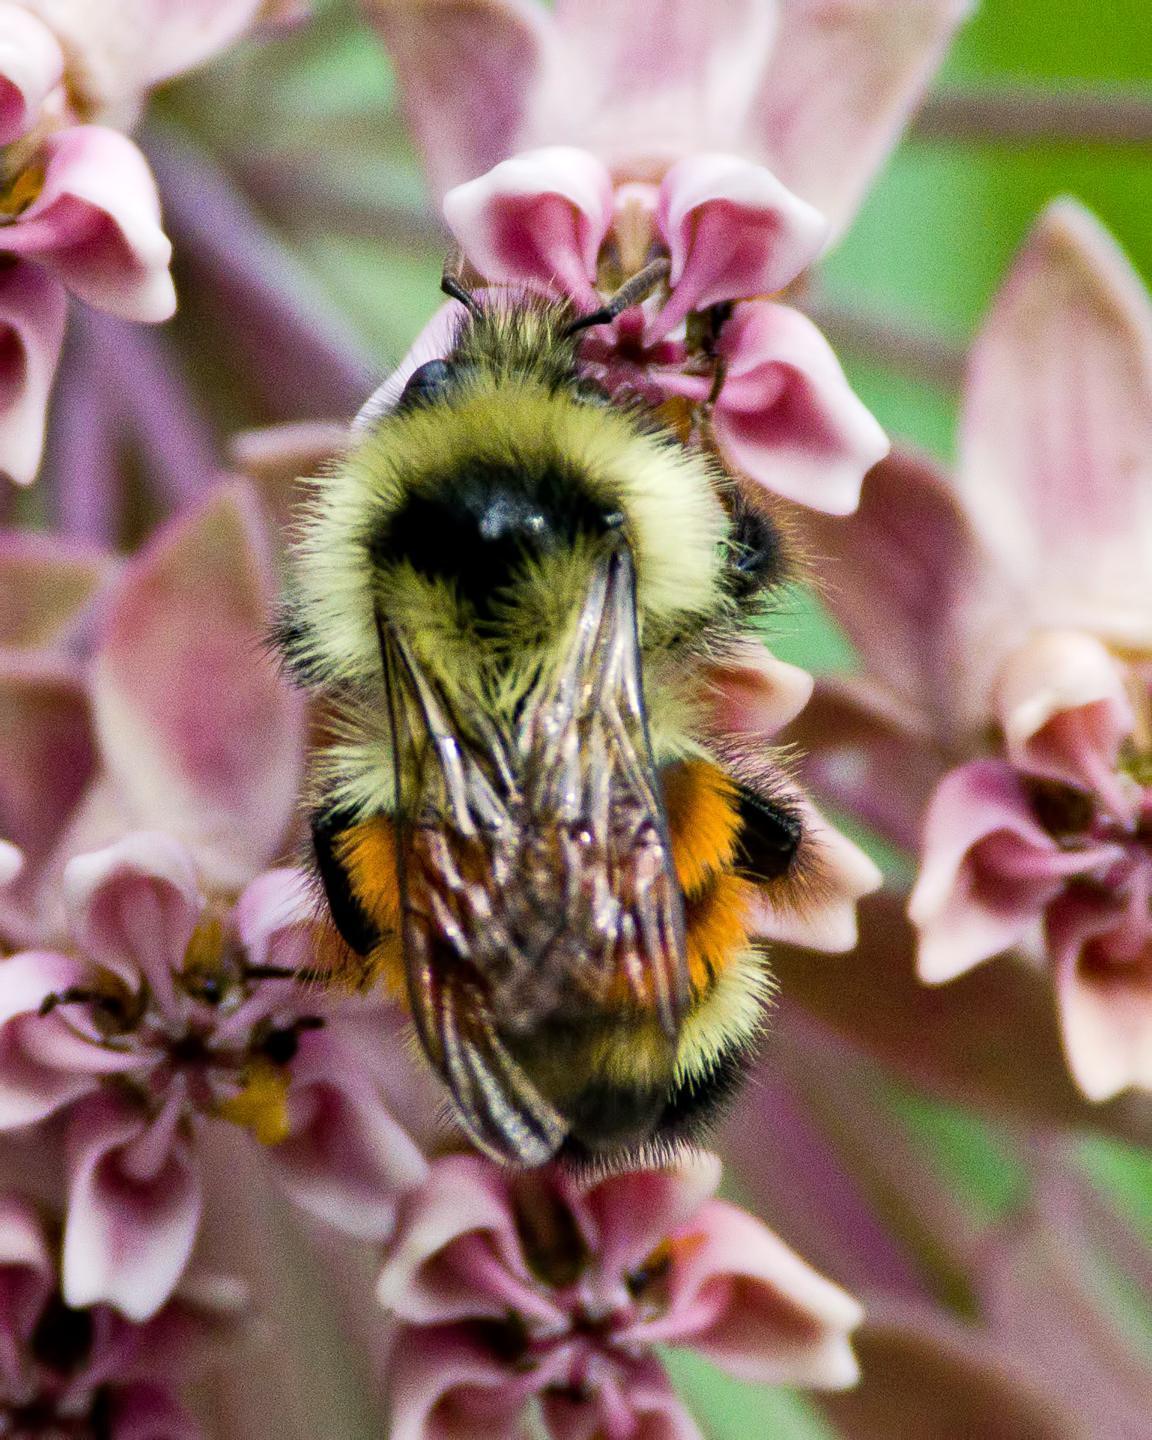 Tri-colored bumble bee Photo by Rob Dickerson